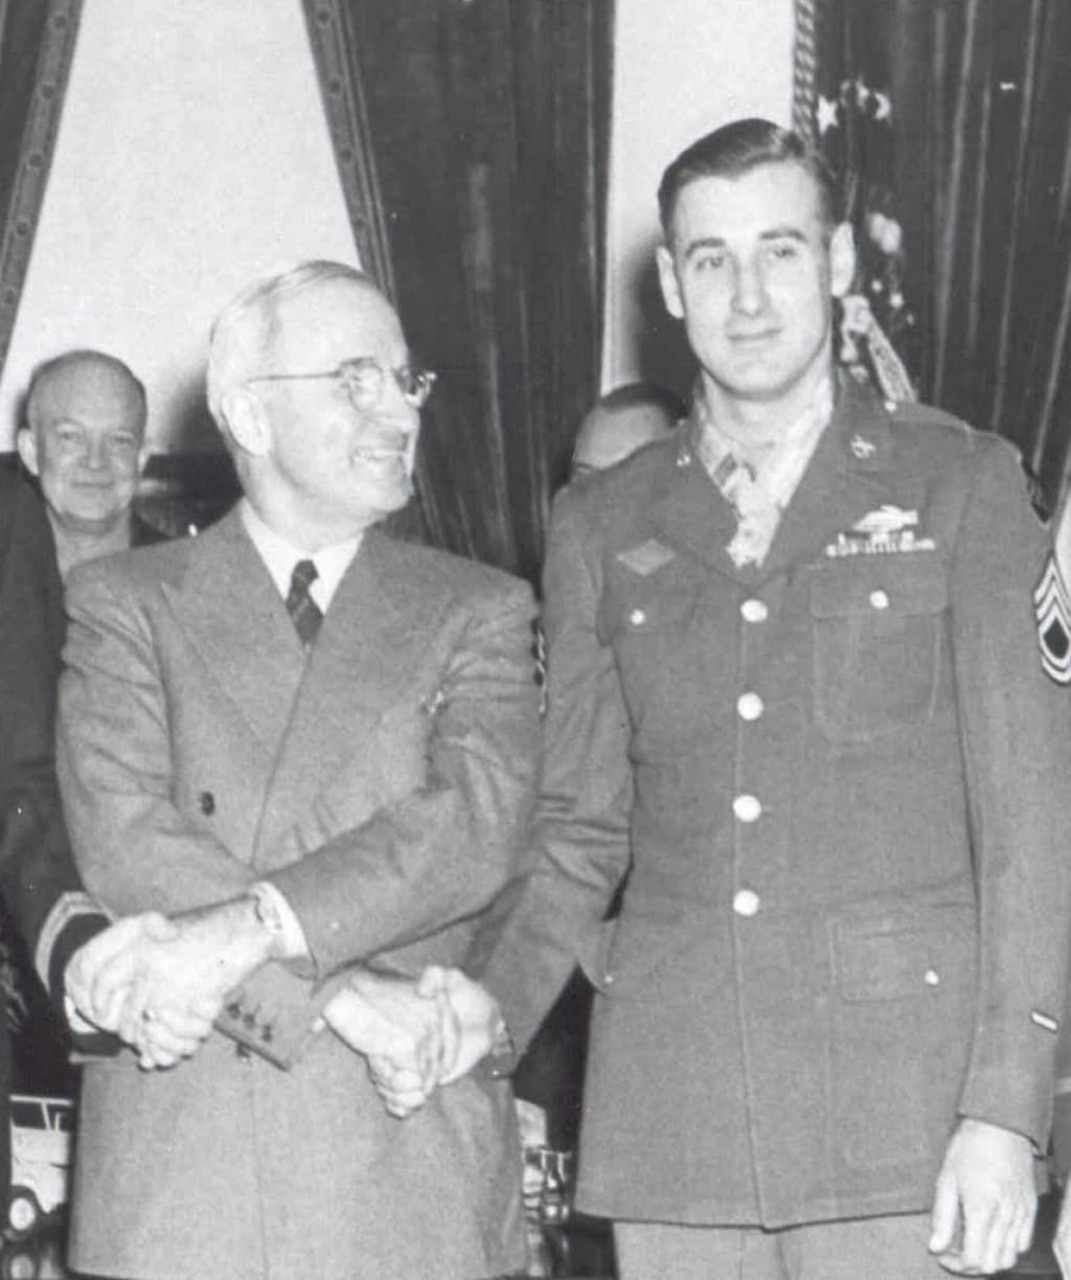 President Harry S. Truman, left, stands holding hands with and looking at a soldier to his left, who is wearing a Medal of Honor around his neck. Army Gen. Dwight D. Eisenhower is smiling in the background.